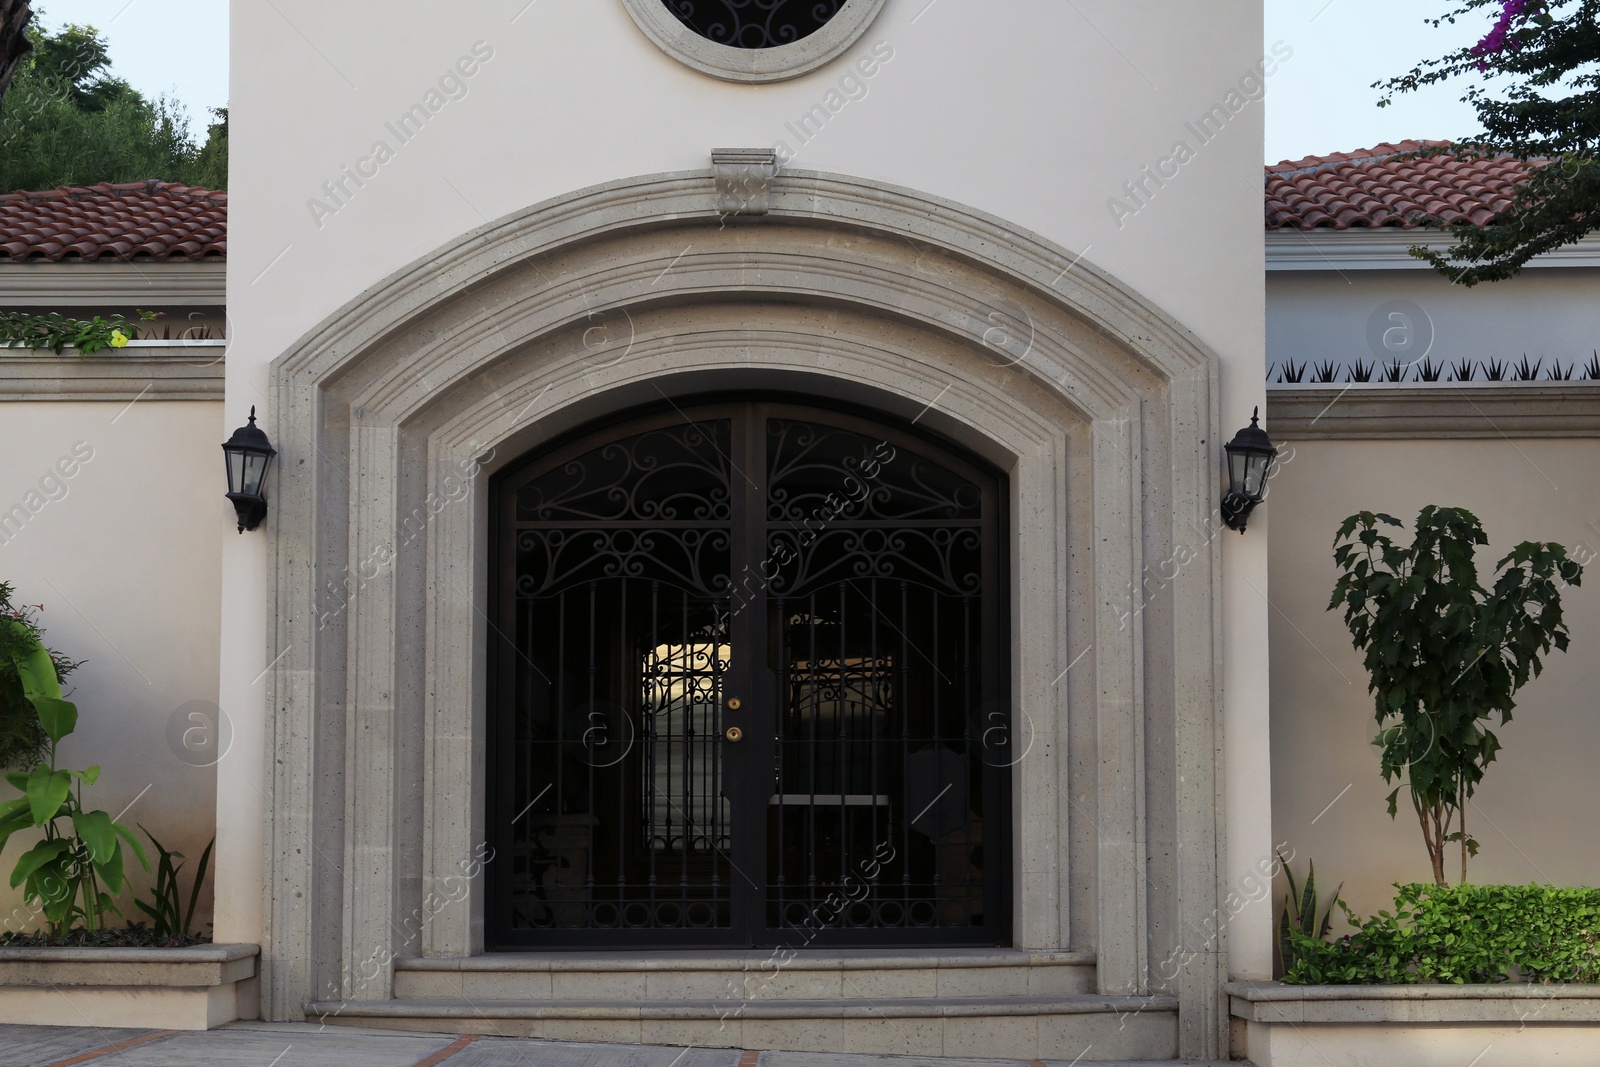 Photo of Entrance of house with beautiful arch and metal gate